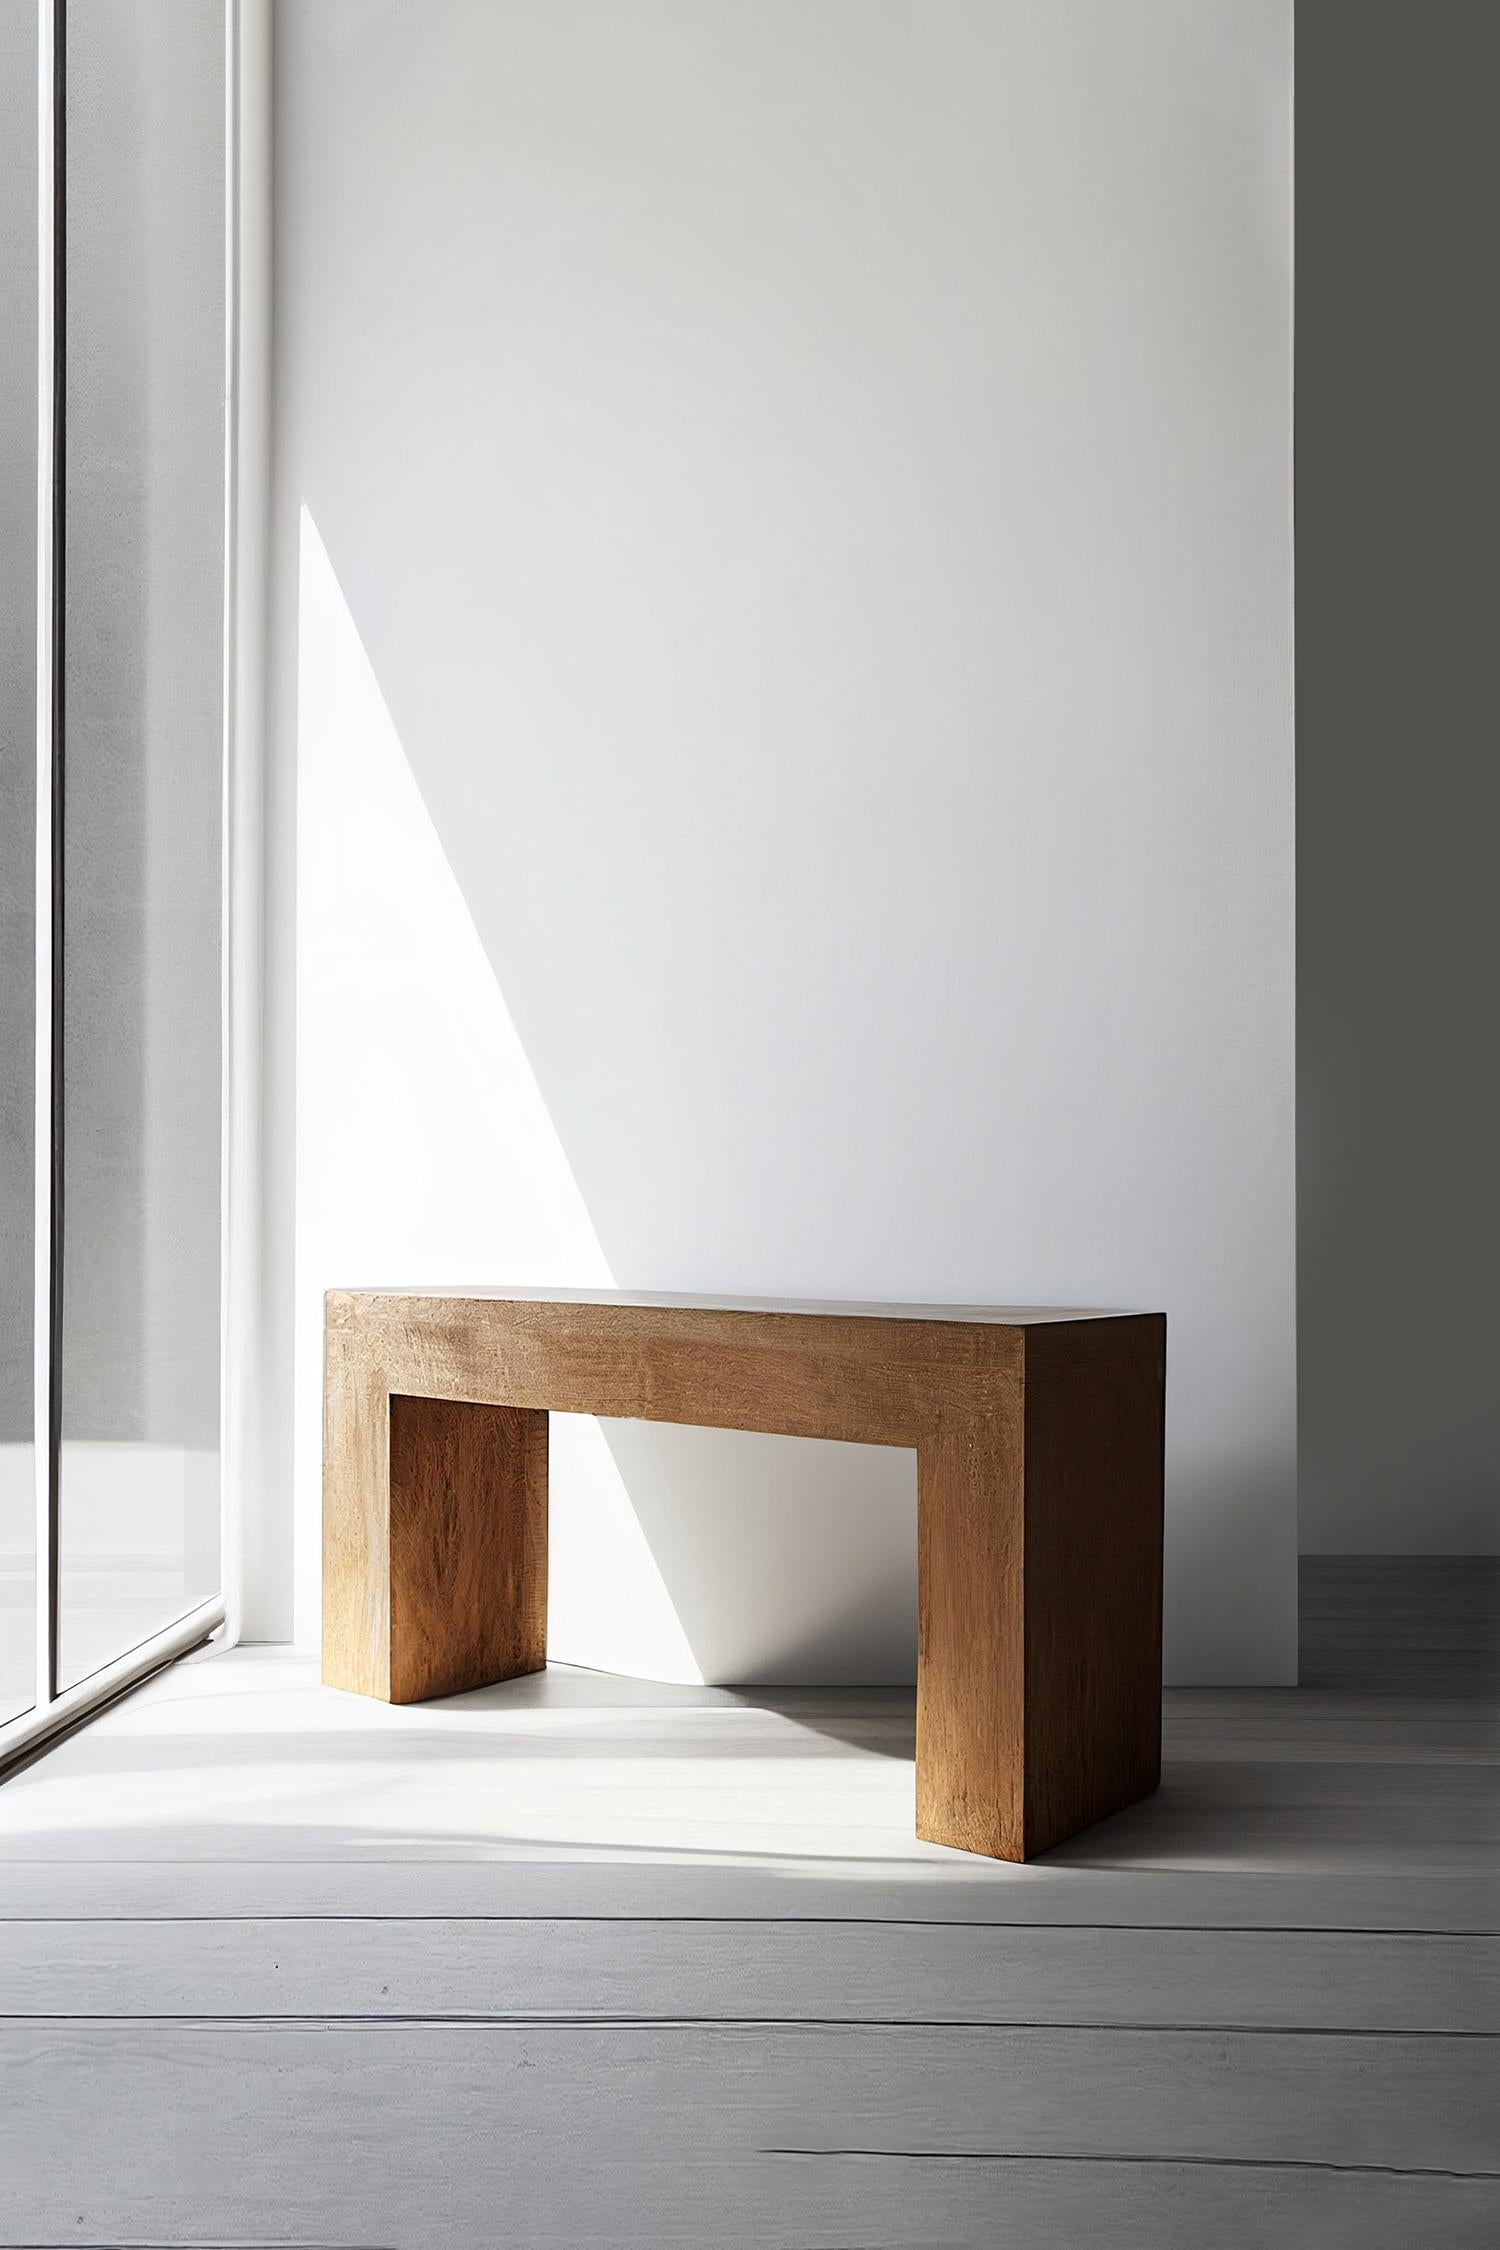 Elefante collection by NONO furniture. 

A distinguished tribute to the architectural movements of Mexican Modernism and Brutalist design. The collection showcases three minimal furniture design pieces, including a versatile side table that